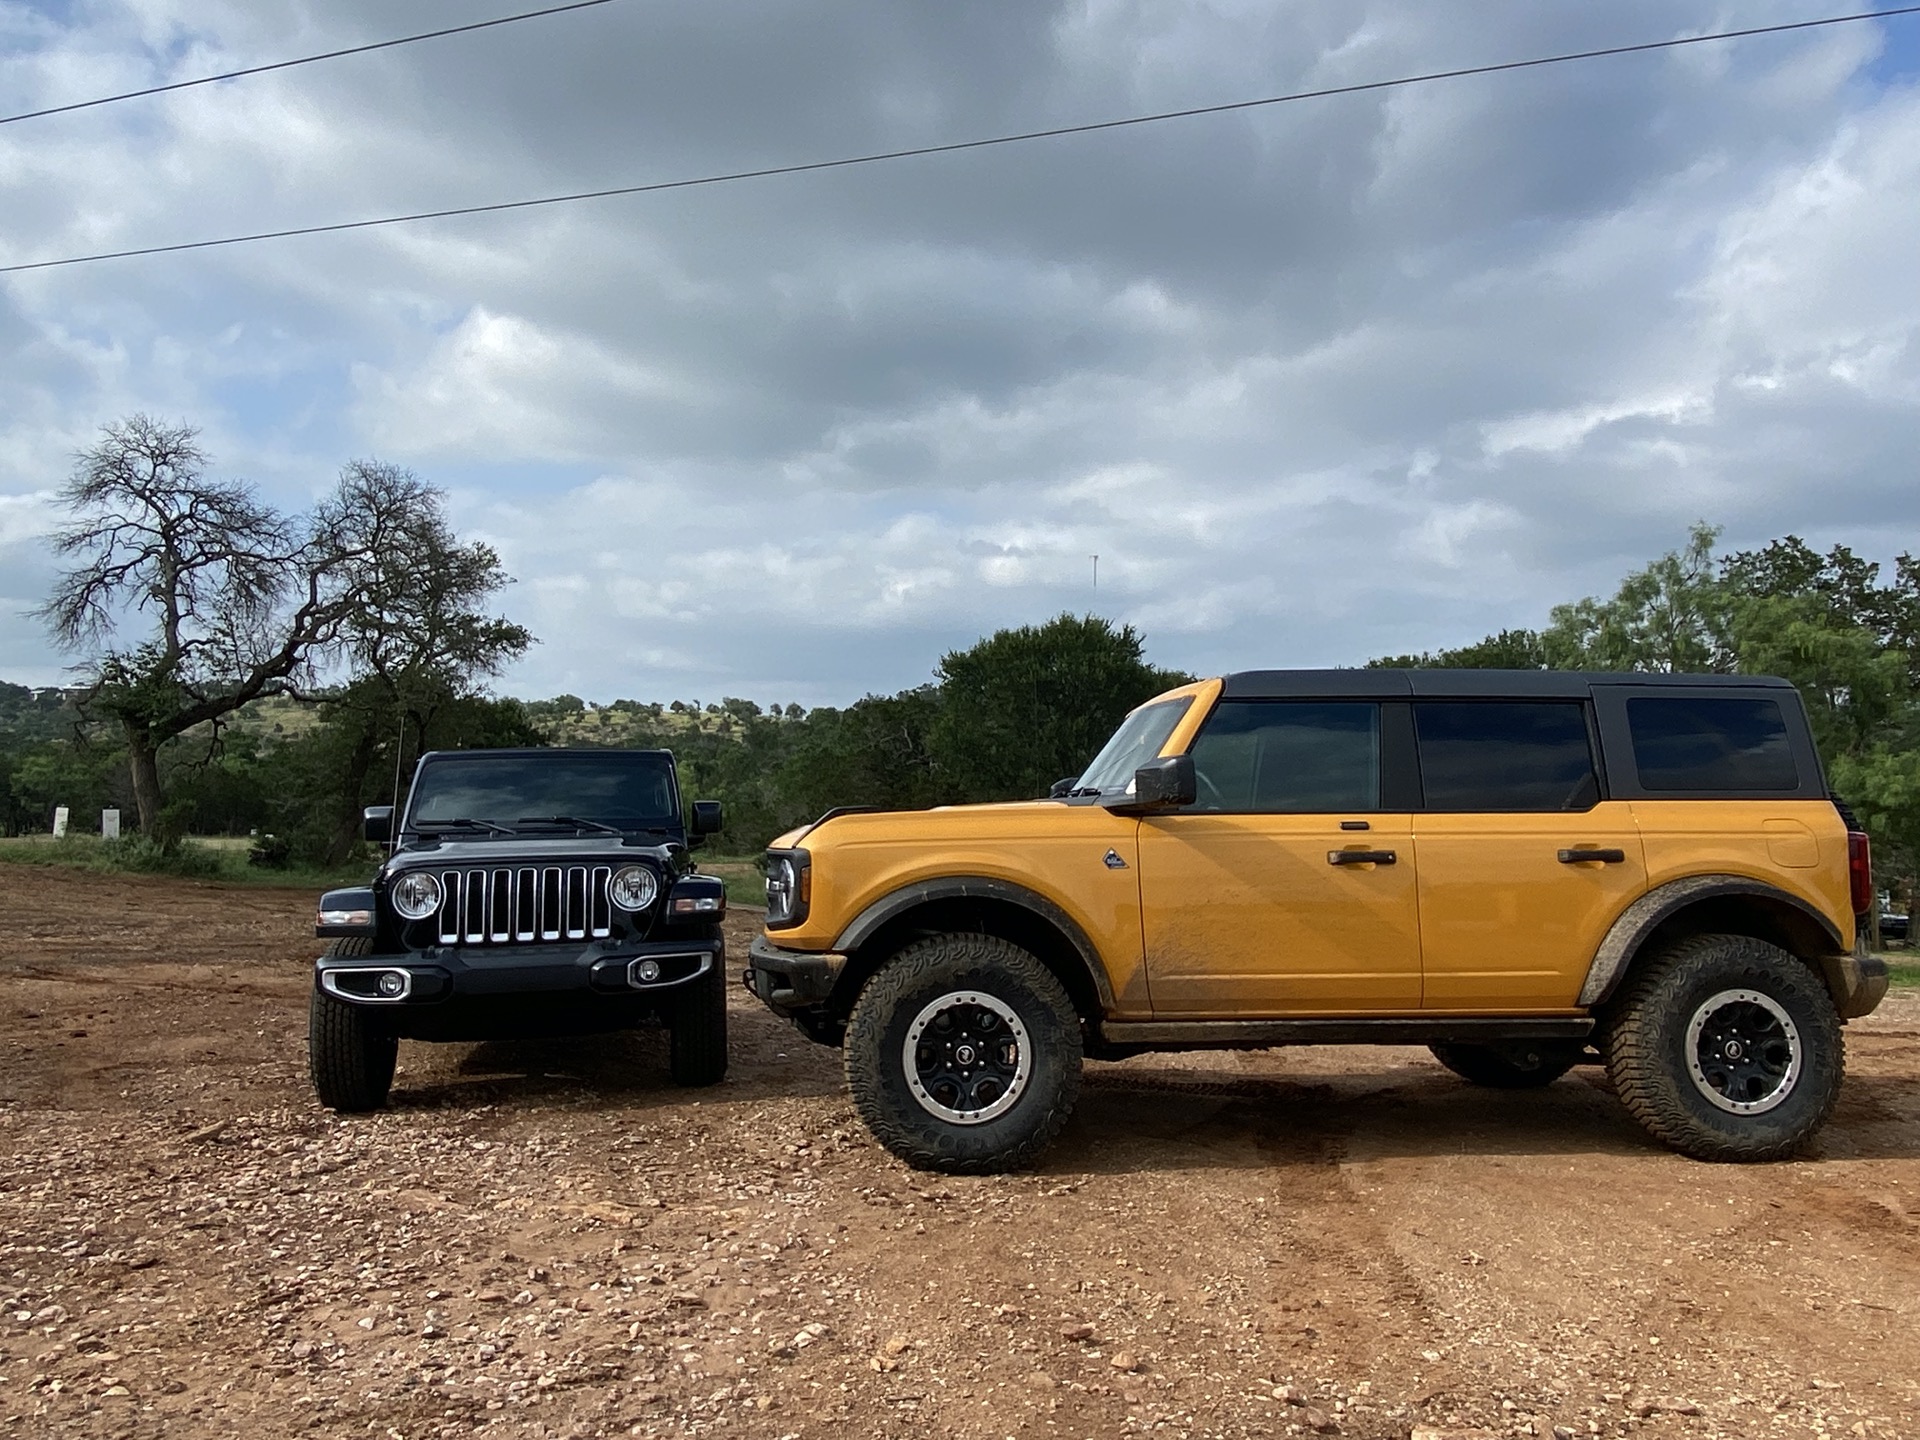 Bronco vs. Wrangler, 2021 Ford Bronco tested, Tesla owner sues over  supercharging: What's New @ The Car Connection